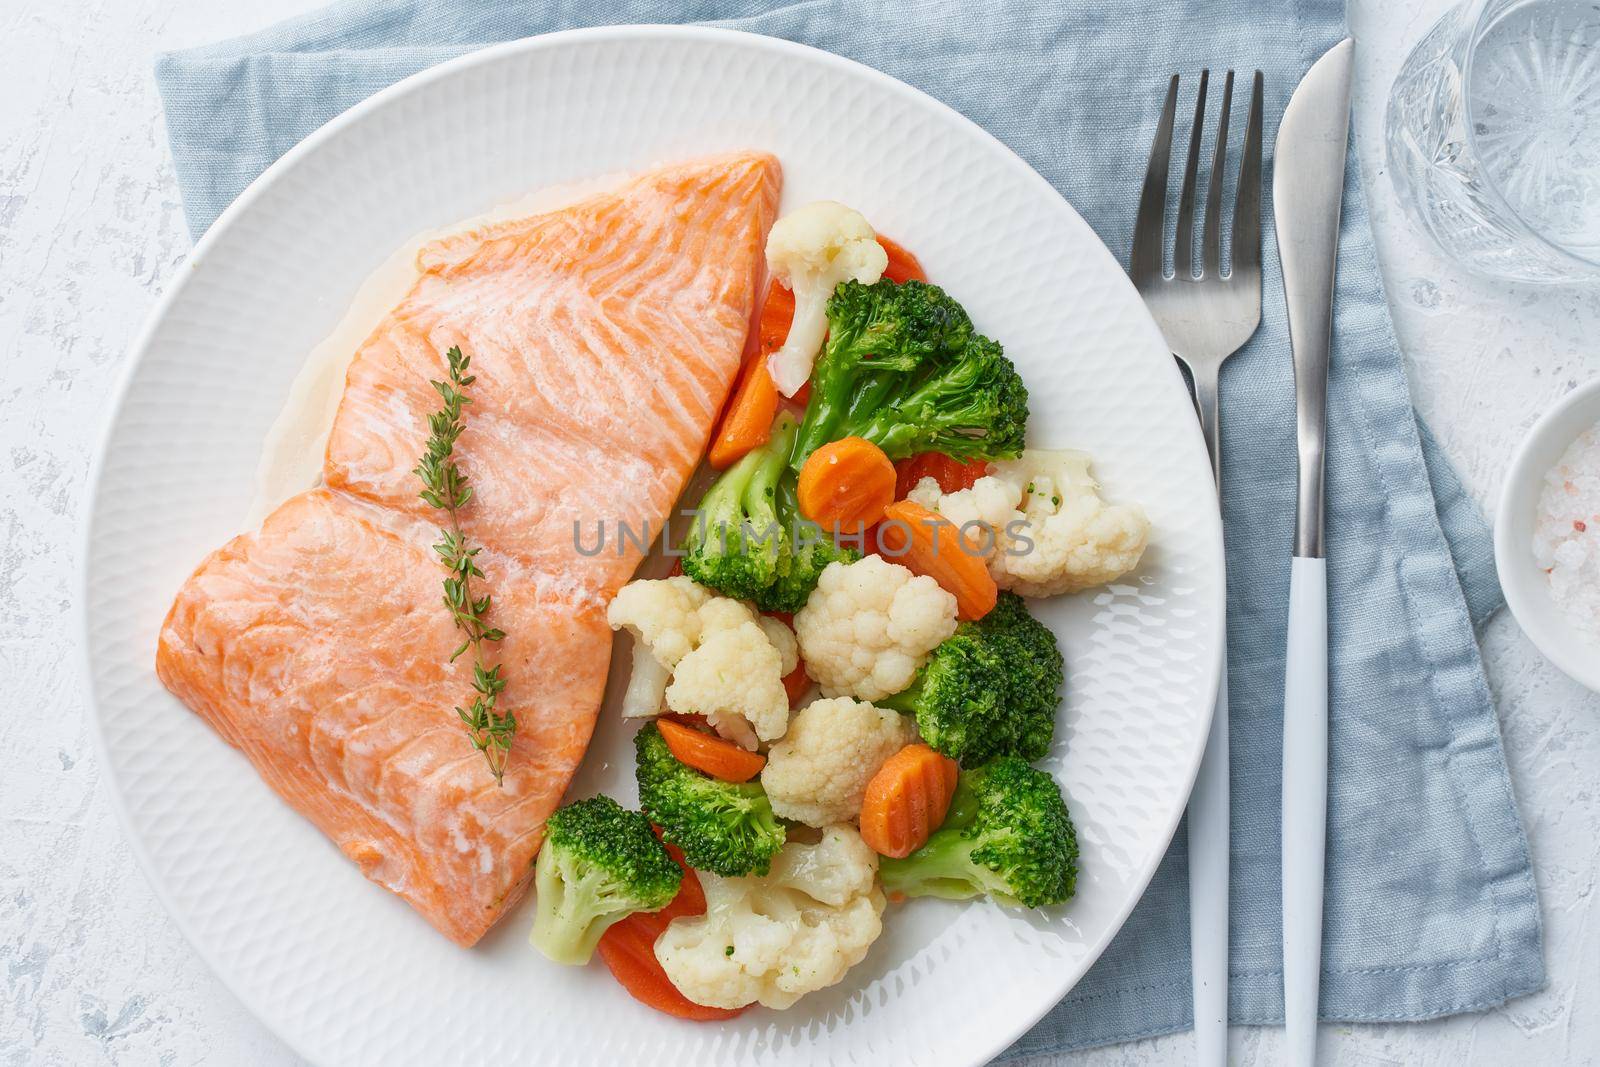 Steam salmon and vegetables, Paleo, keto, fodmap, dash diet. Mediterranean diet with steamed fish. Healthy concept, white plate on gray table, gluten free, lectine free, top view